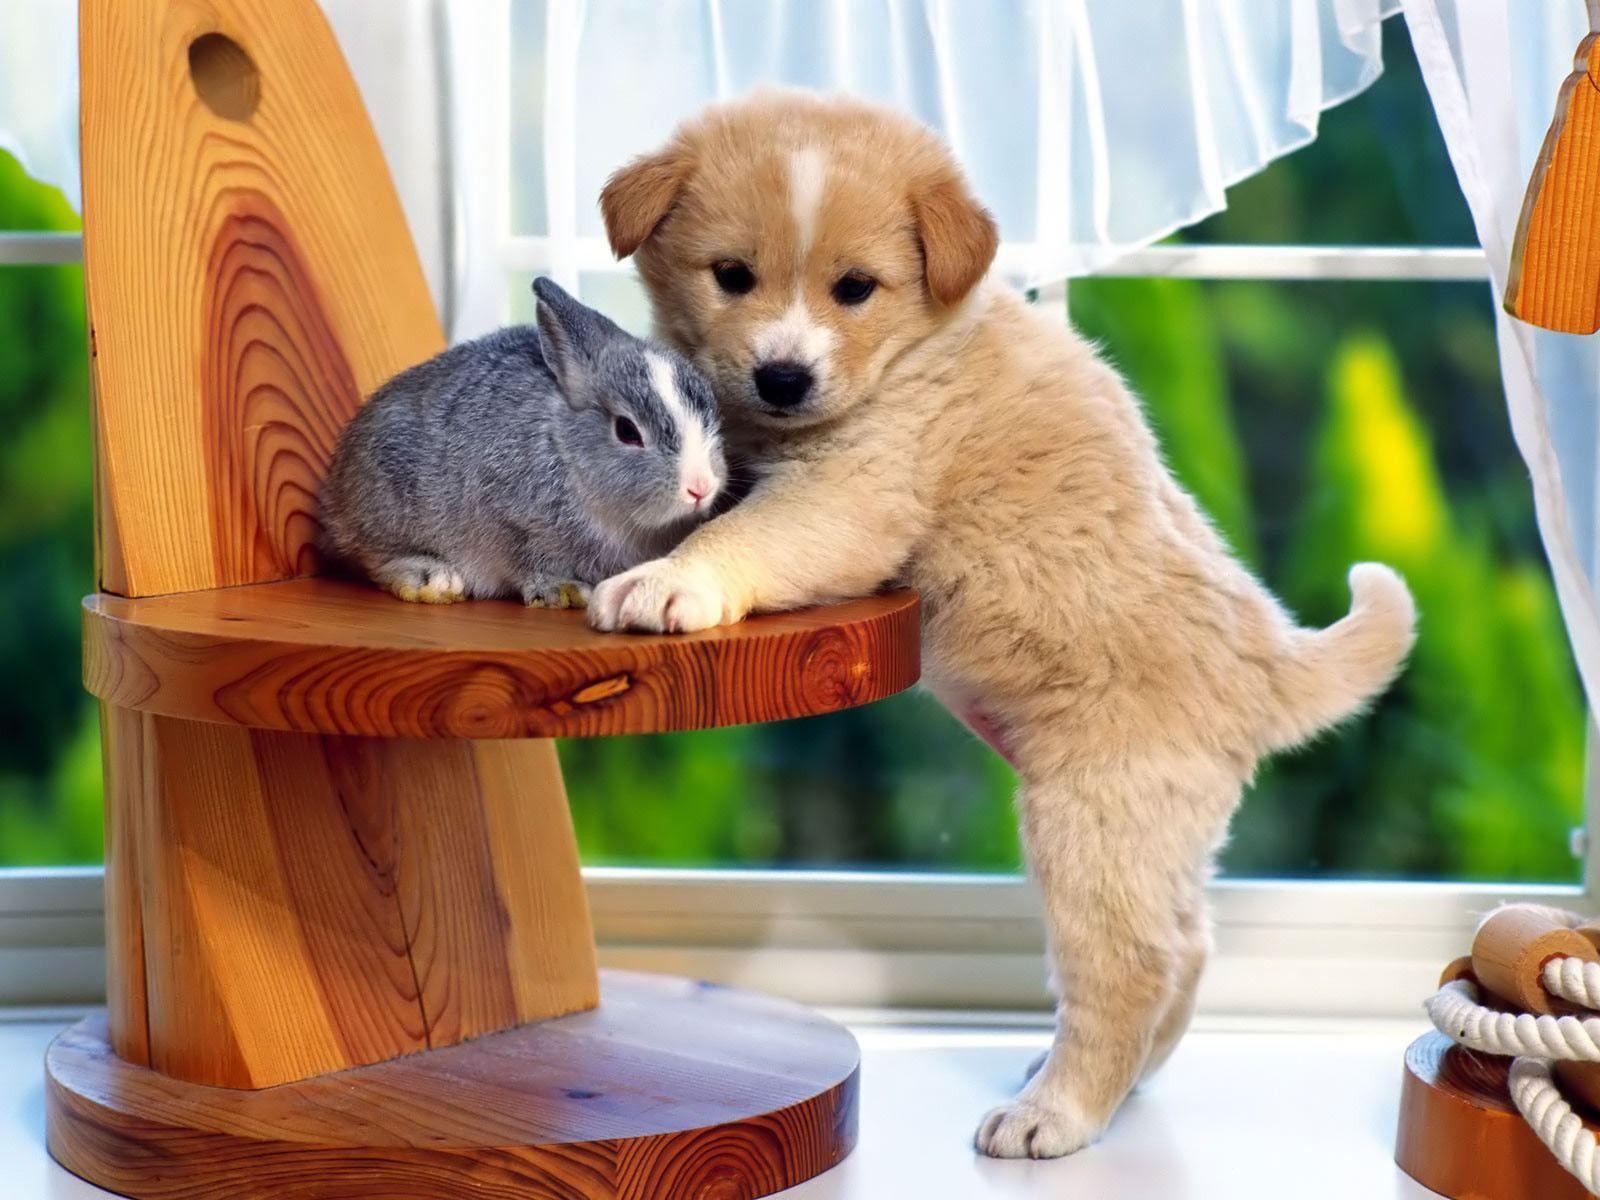 Cute Puppy And Bunny (id: 20436)